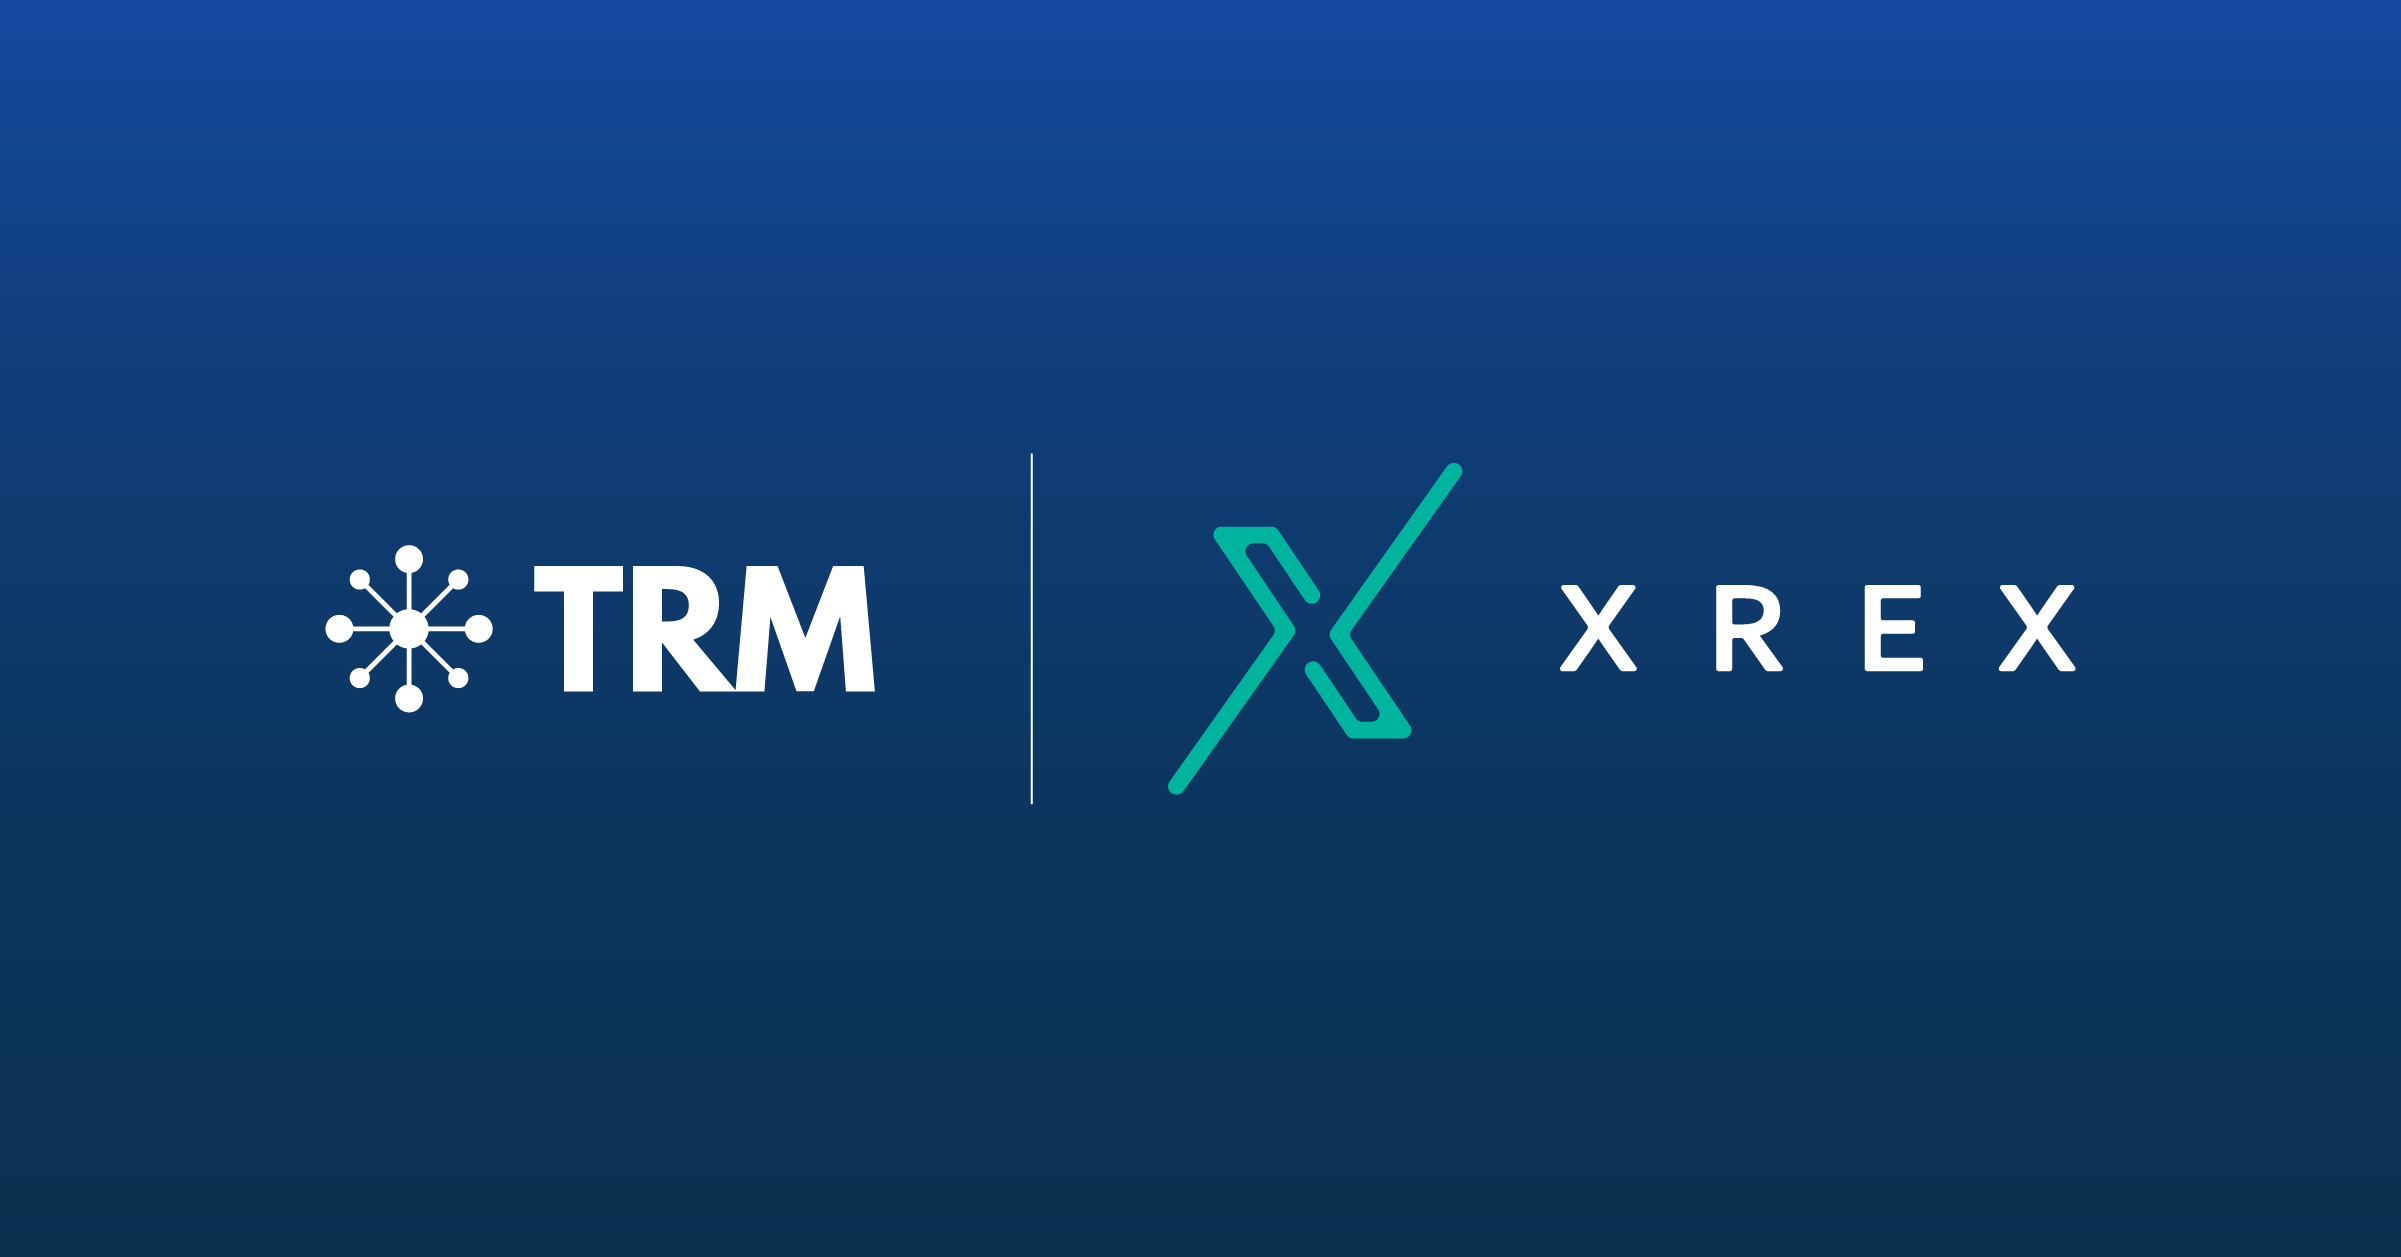 XREX Implements TRM Labs Tools to Bolster Platform Security  